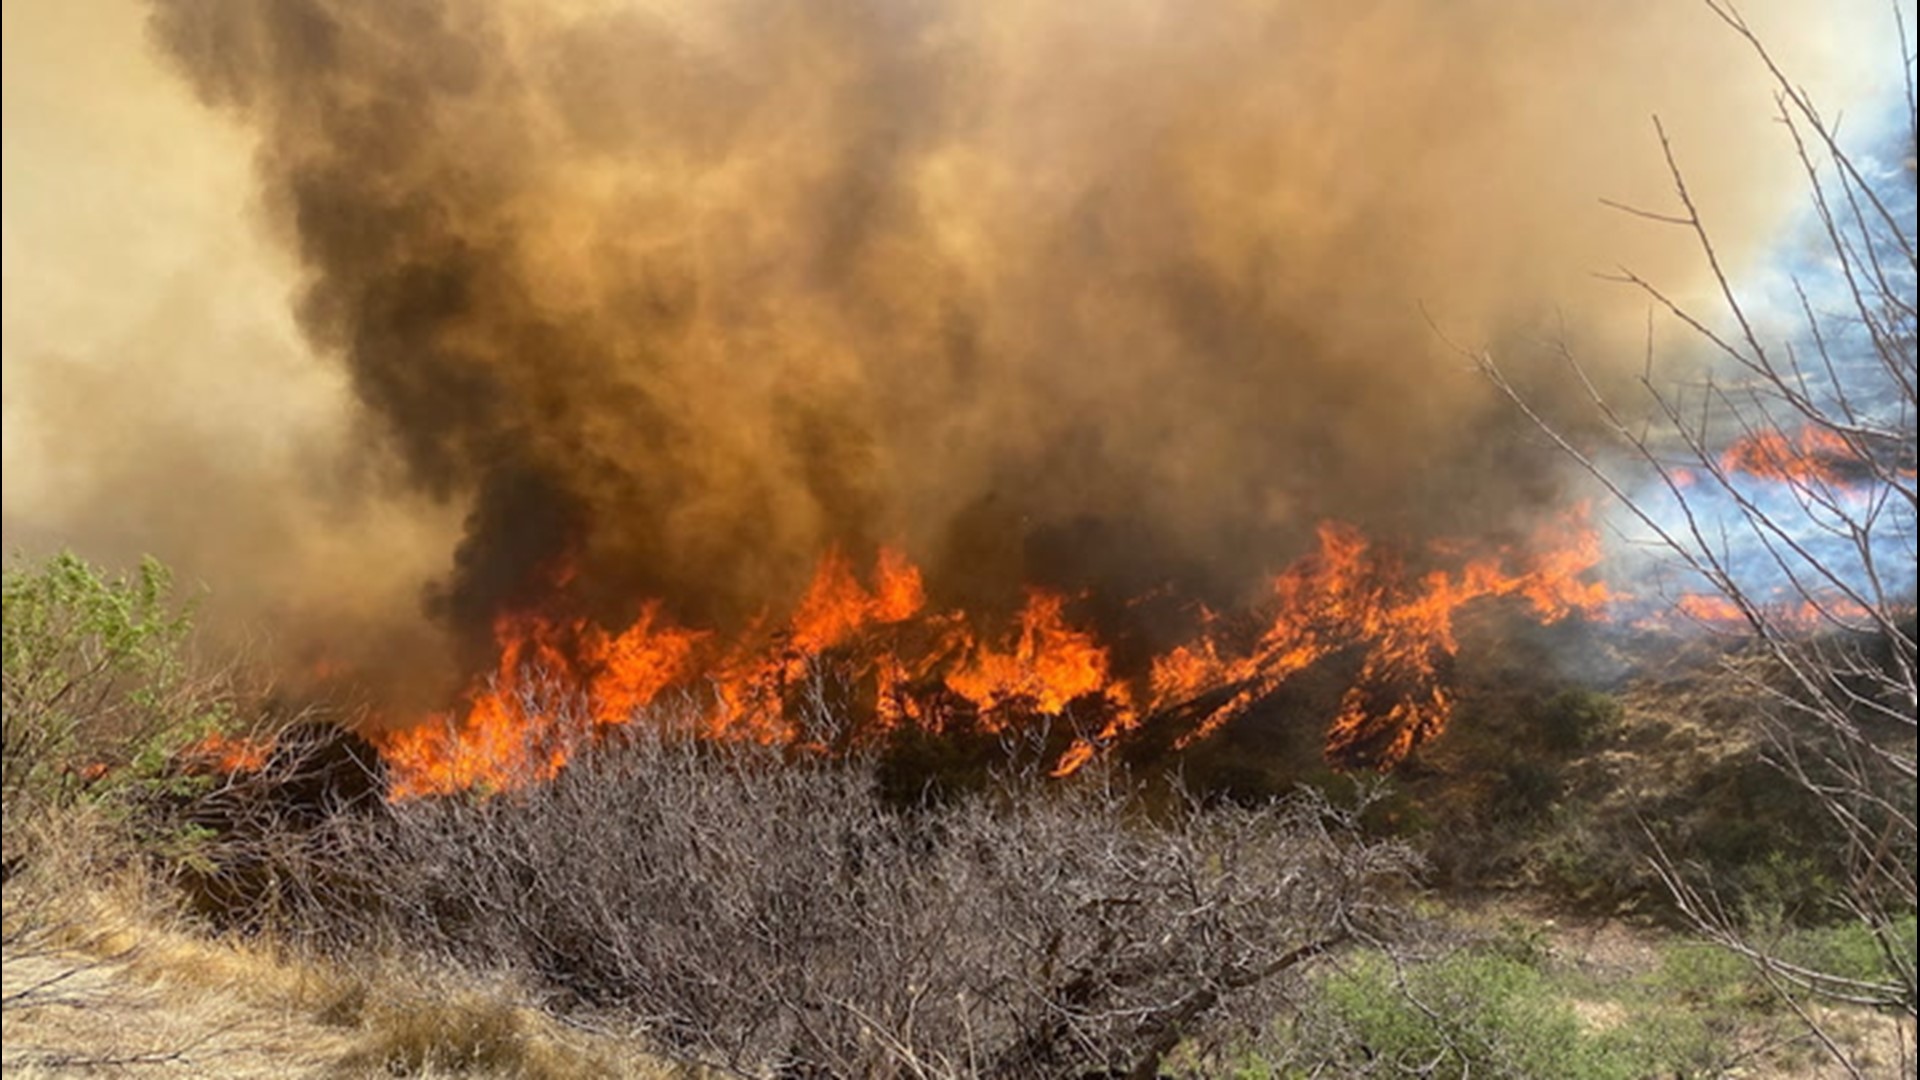 The Copper Canyon Fire burned more than 2,400 acres in the span of a day as firefighters battled wind gusts and dry heat in addition to the fire.